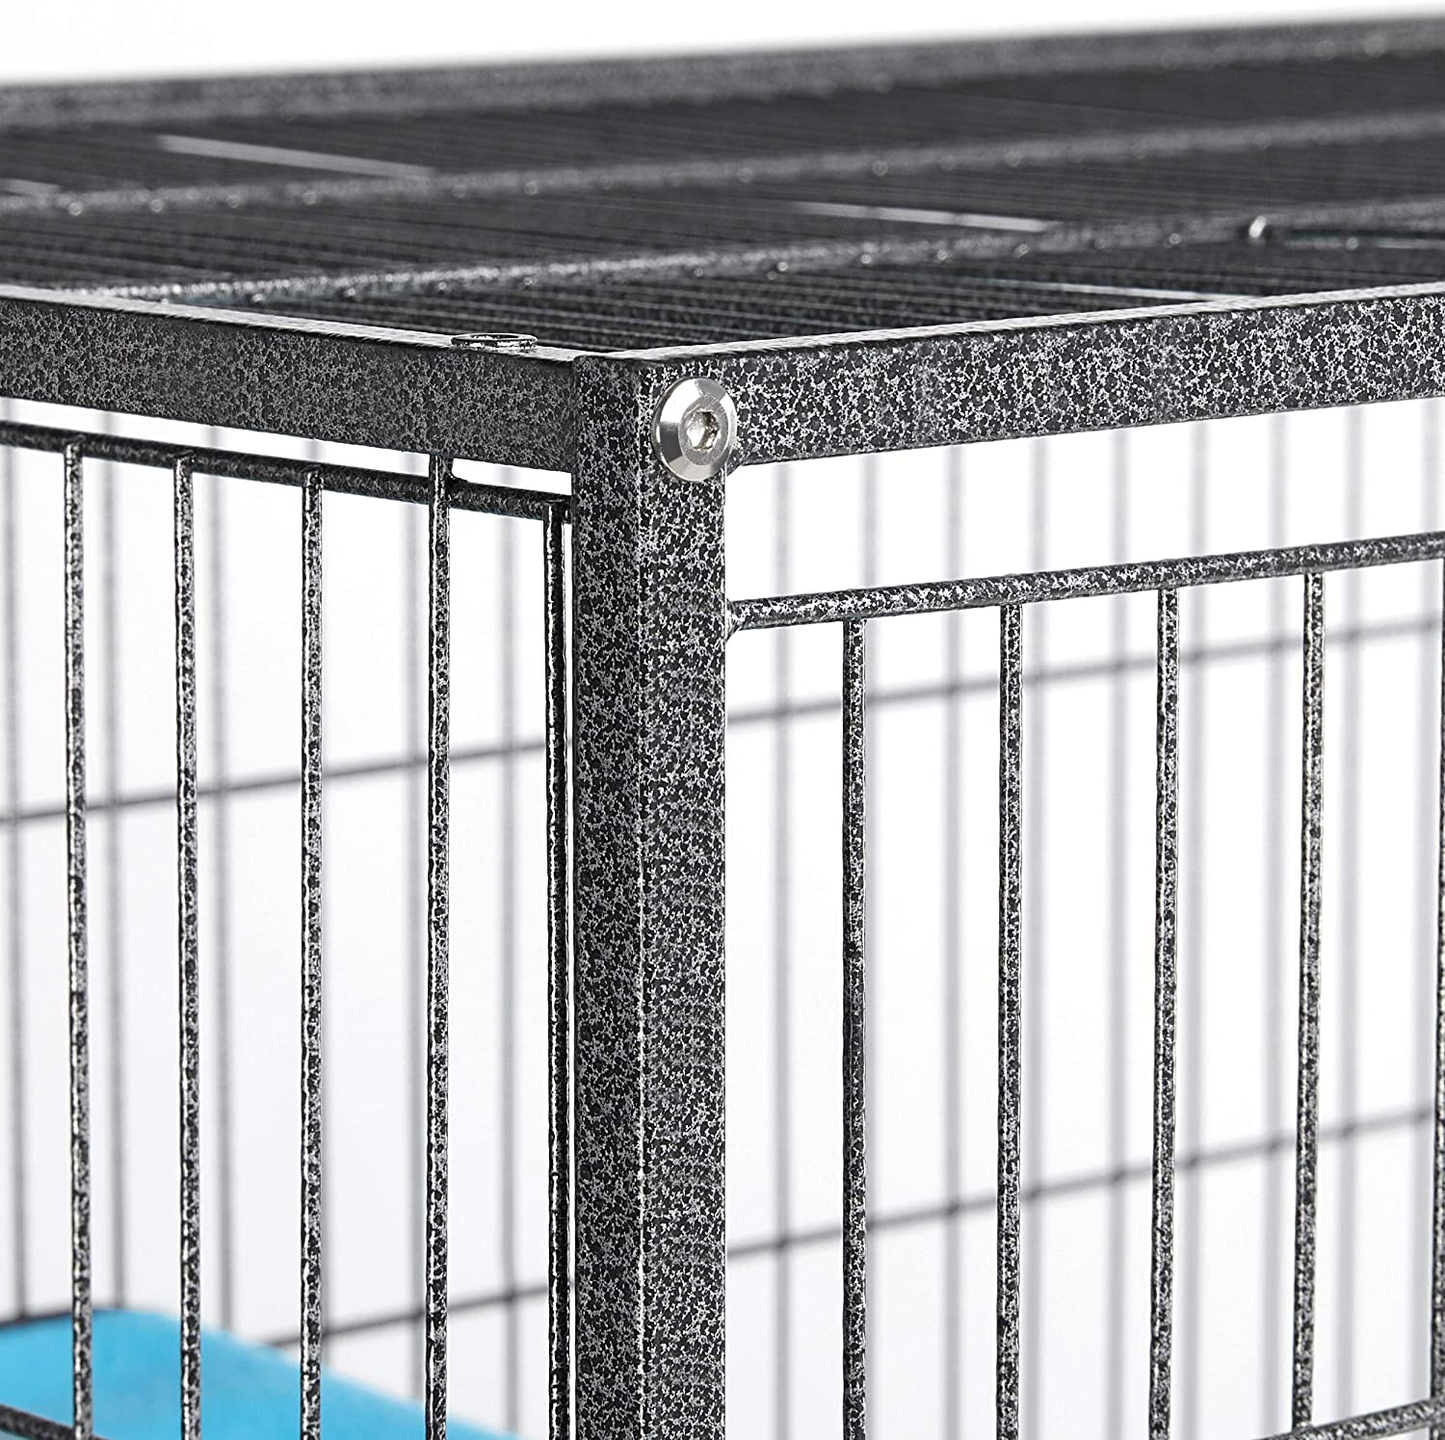 Topeakmart Small Animals Cages Ferret/Guinea Pigs/Chinchilla/Rabbit Cages Single/Double-Story Rolling Metal Critter Nation W/ 2 Removable Ramps &Litter Box, Hammock Black/White